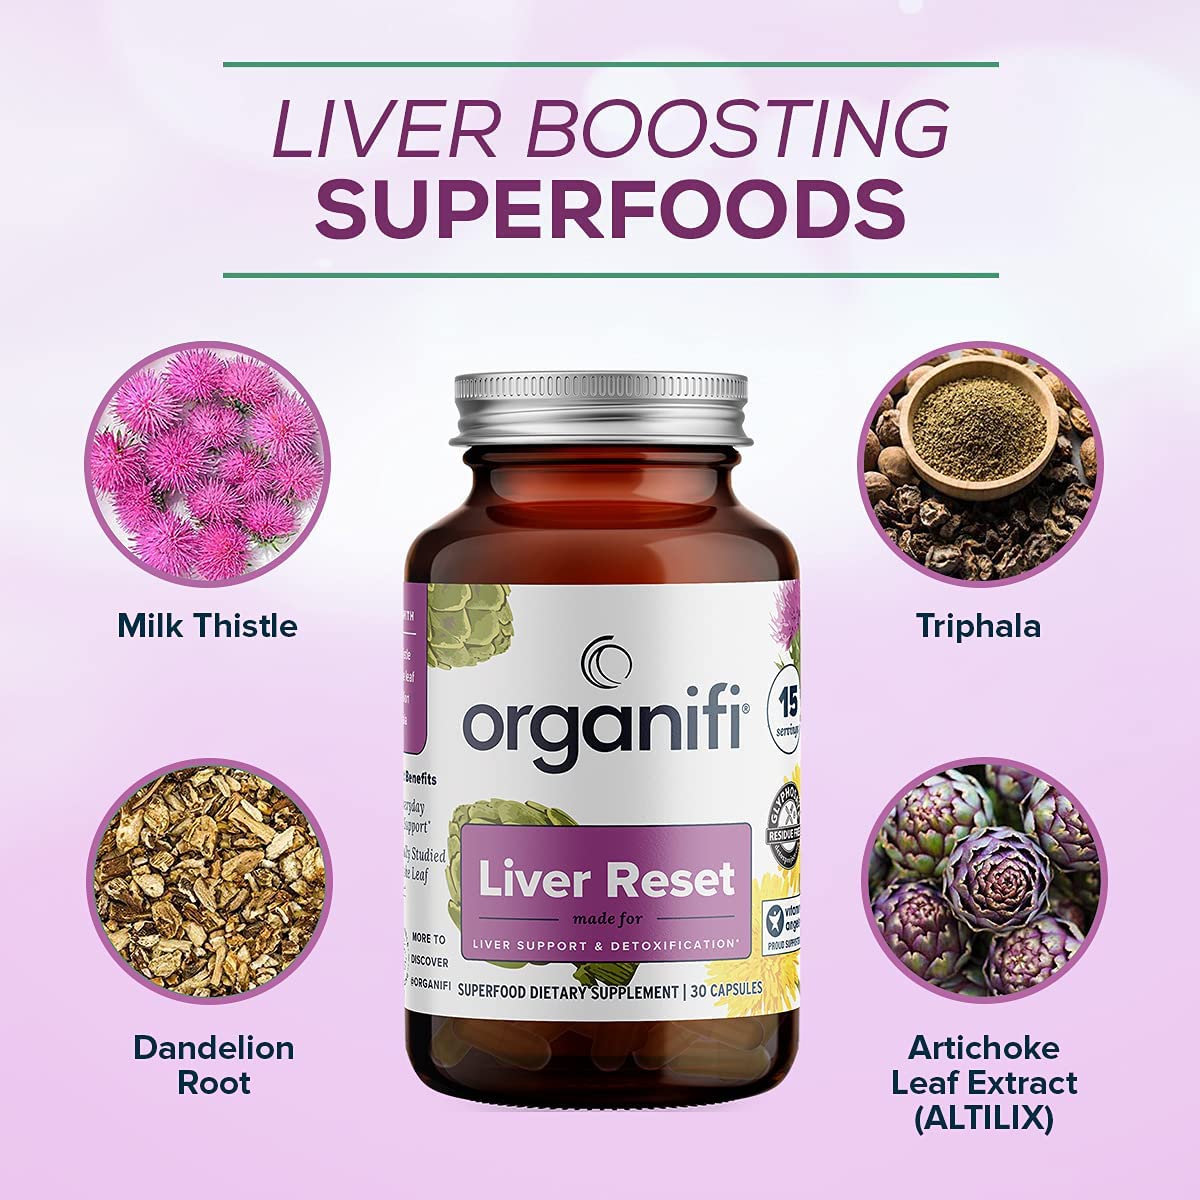 superfood ingredients that go into Organifi Liver Reset